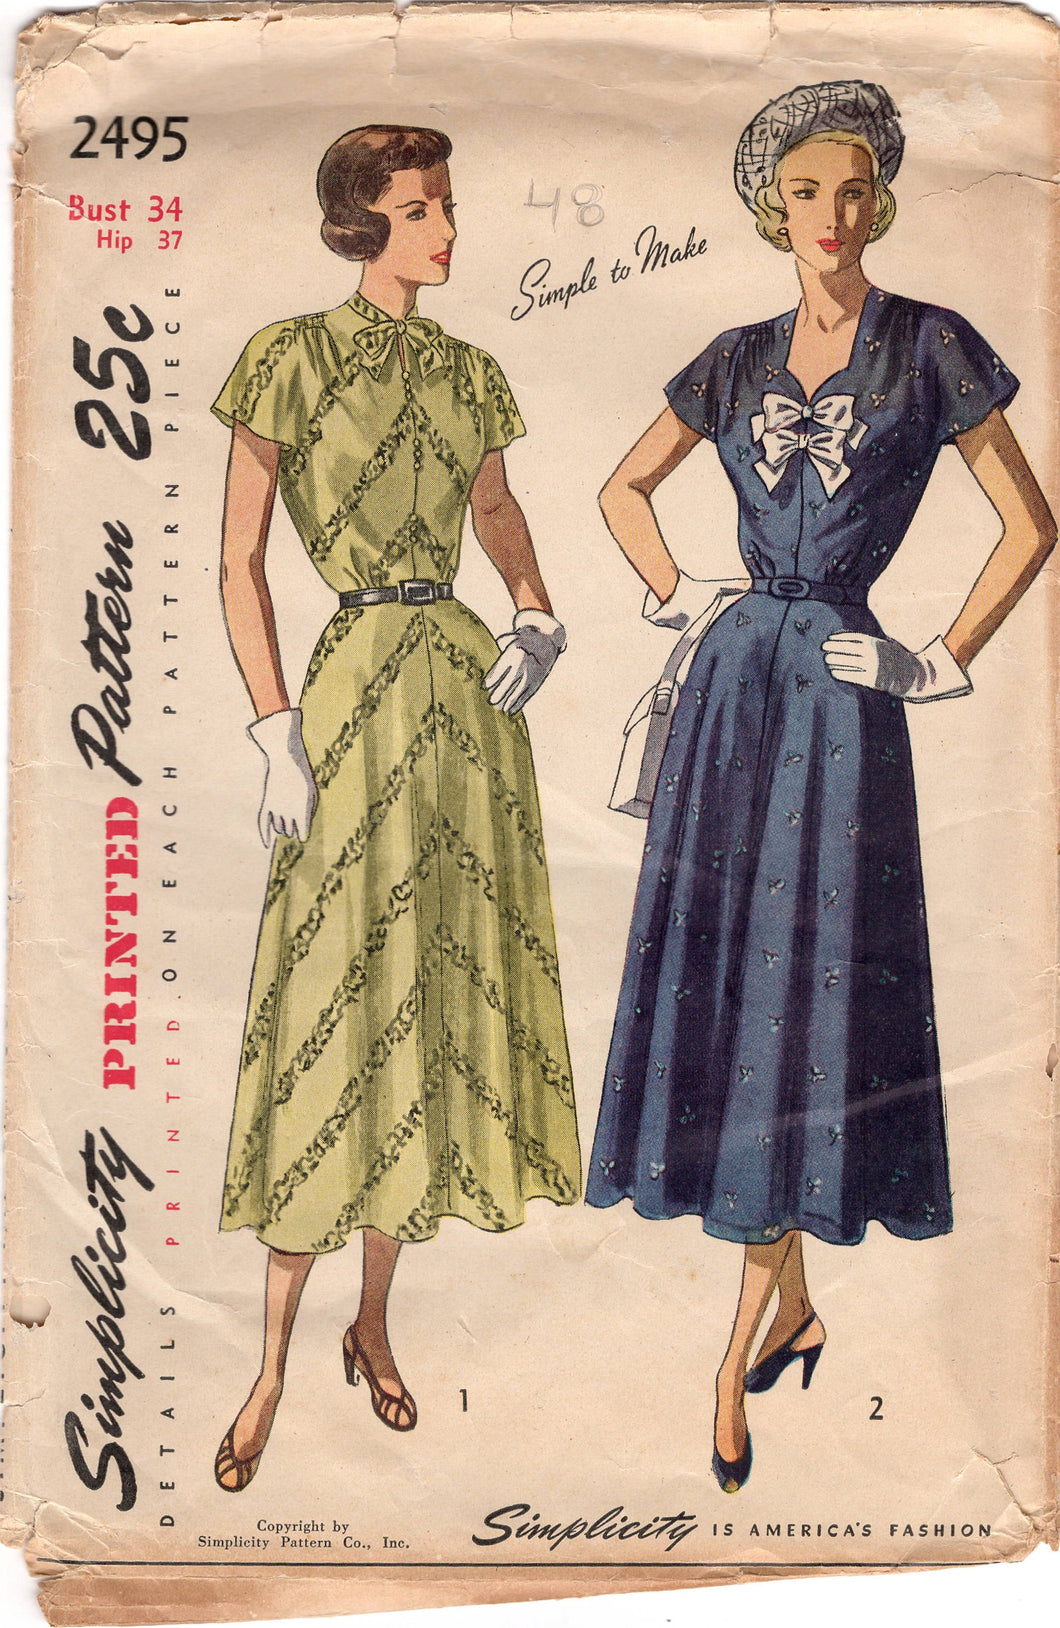 1940's Simplicity One Piece Dress with High or Sweetheart Neckline and Bow detail - Bust 34